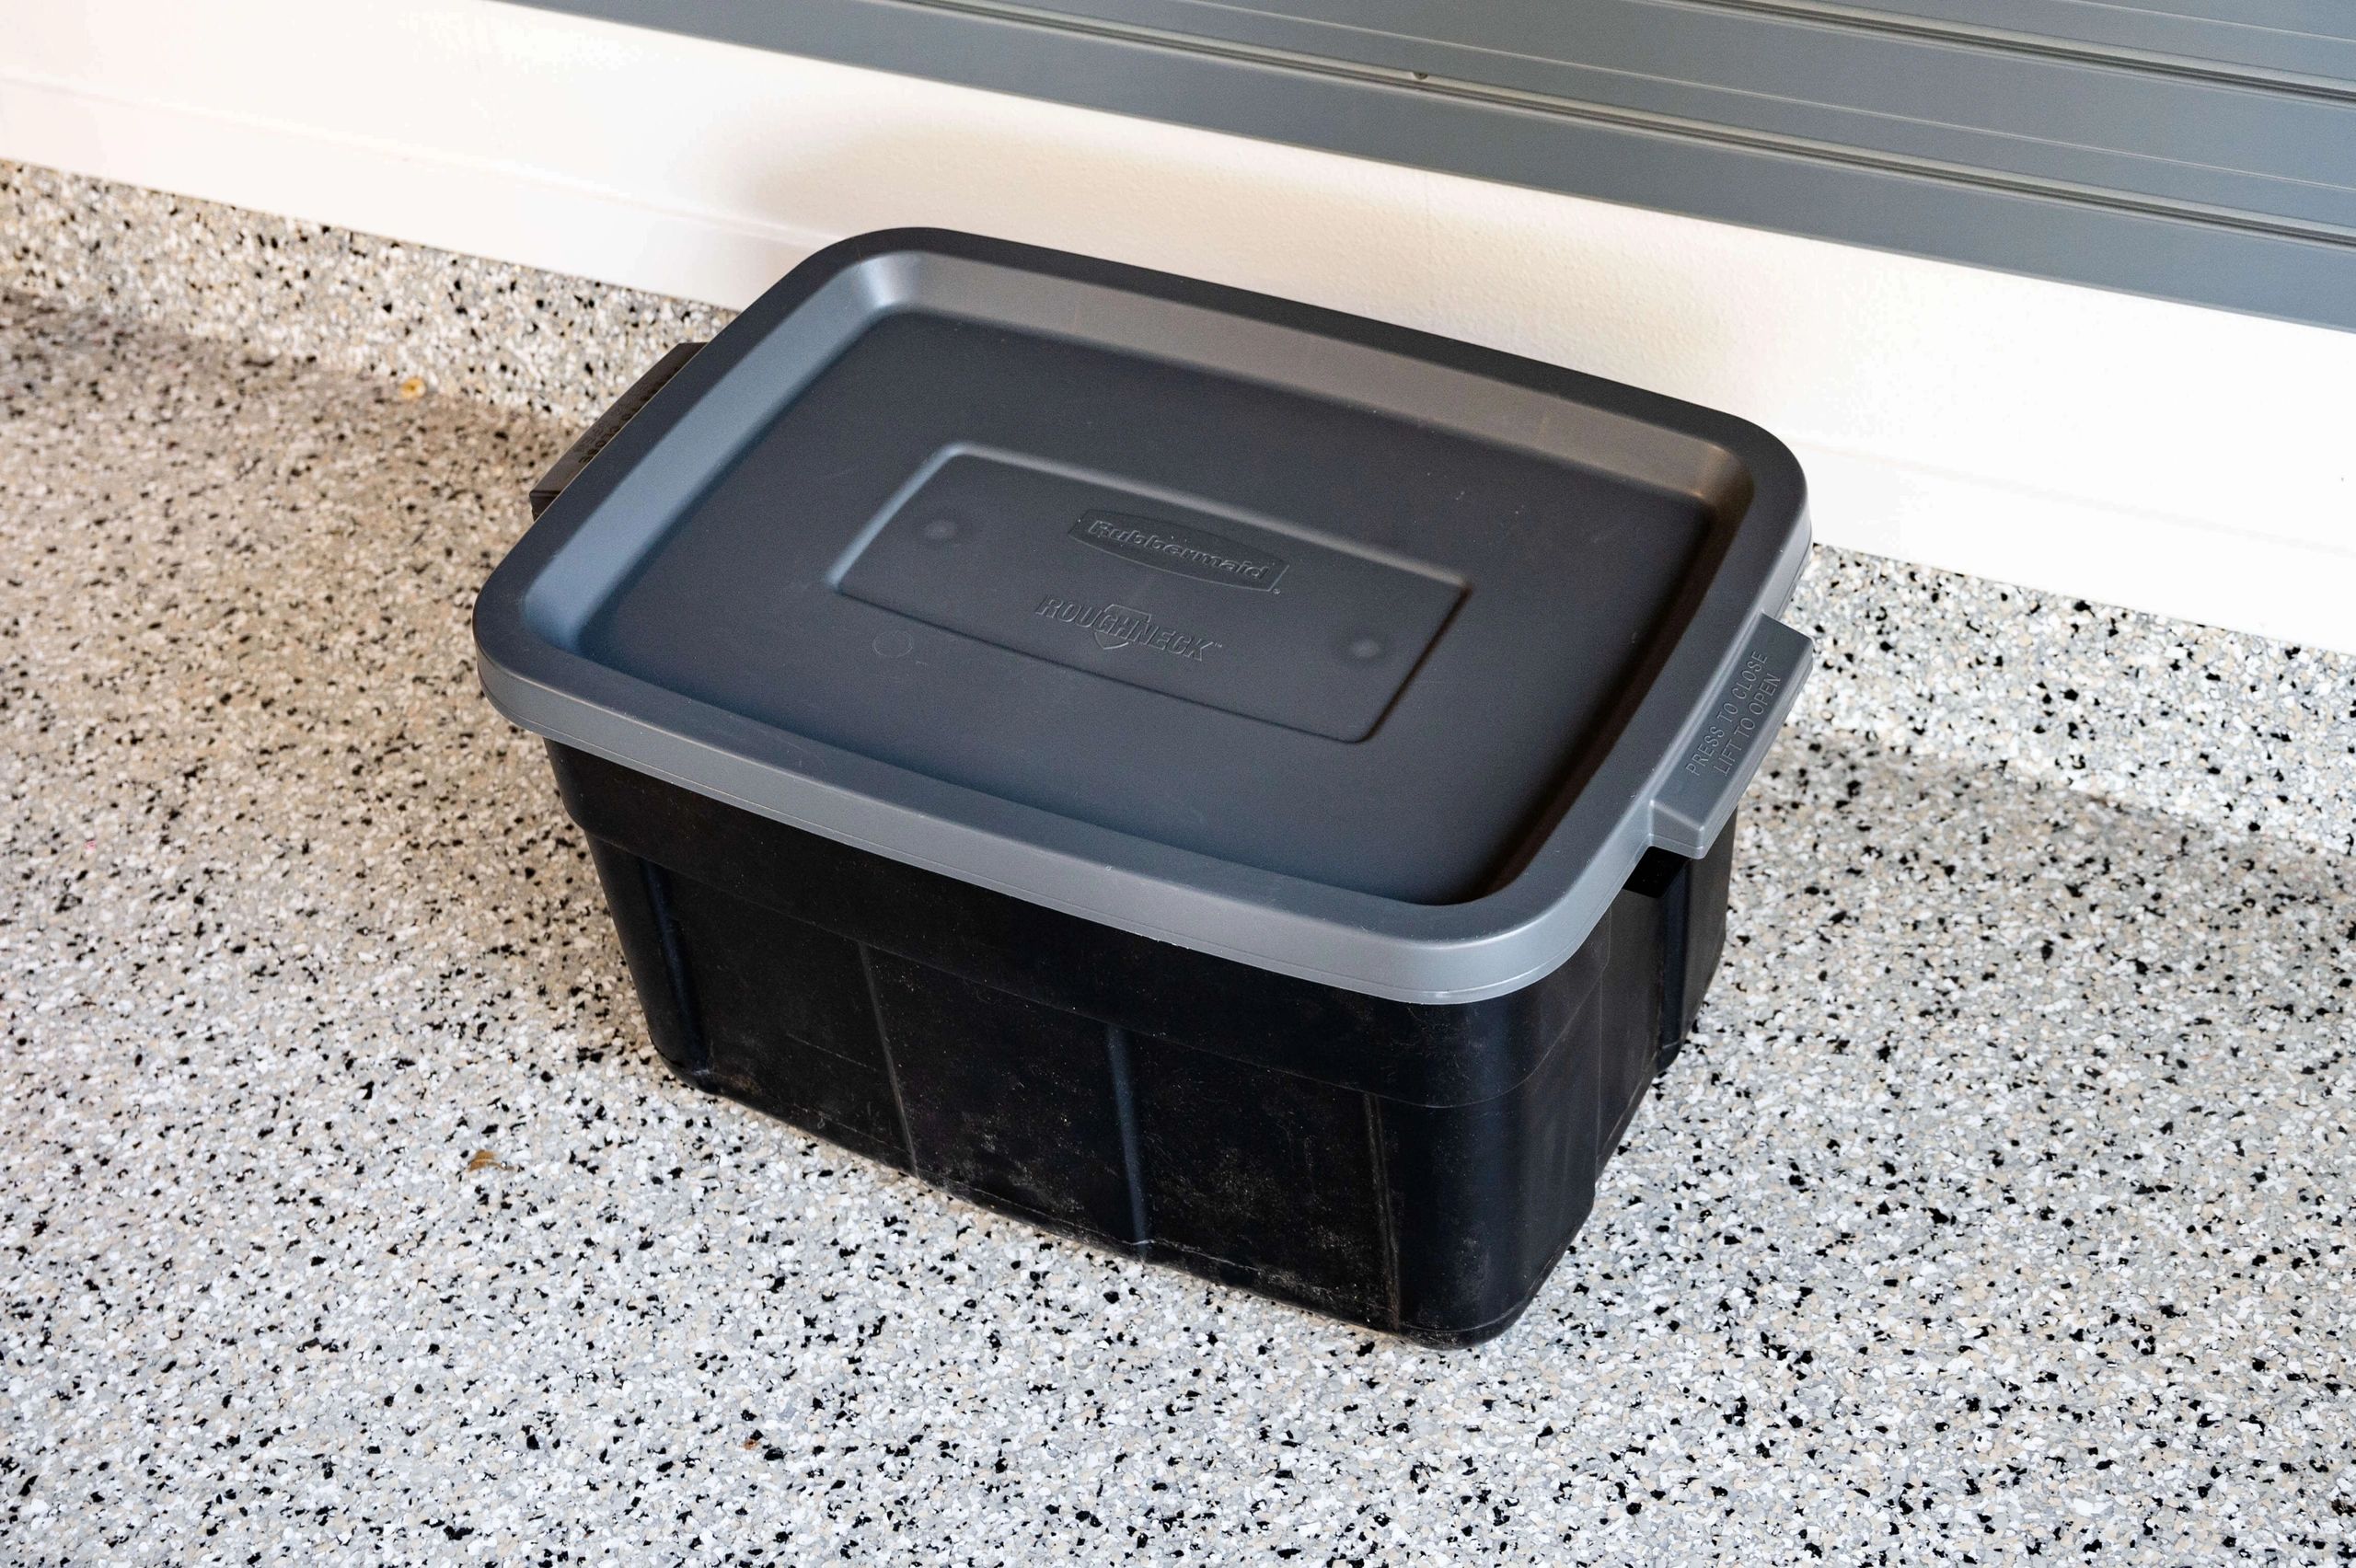 Rubbermaid Cooler - Food and Waste Storage